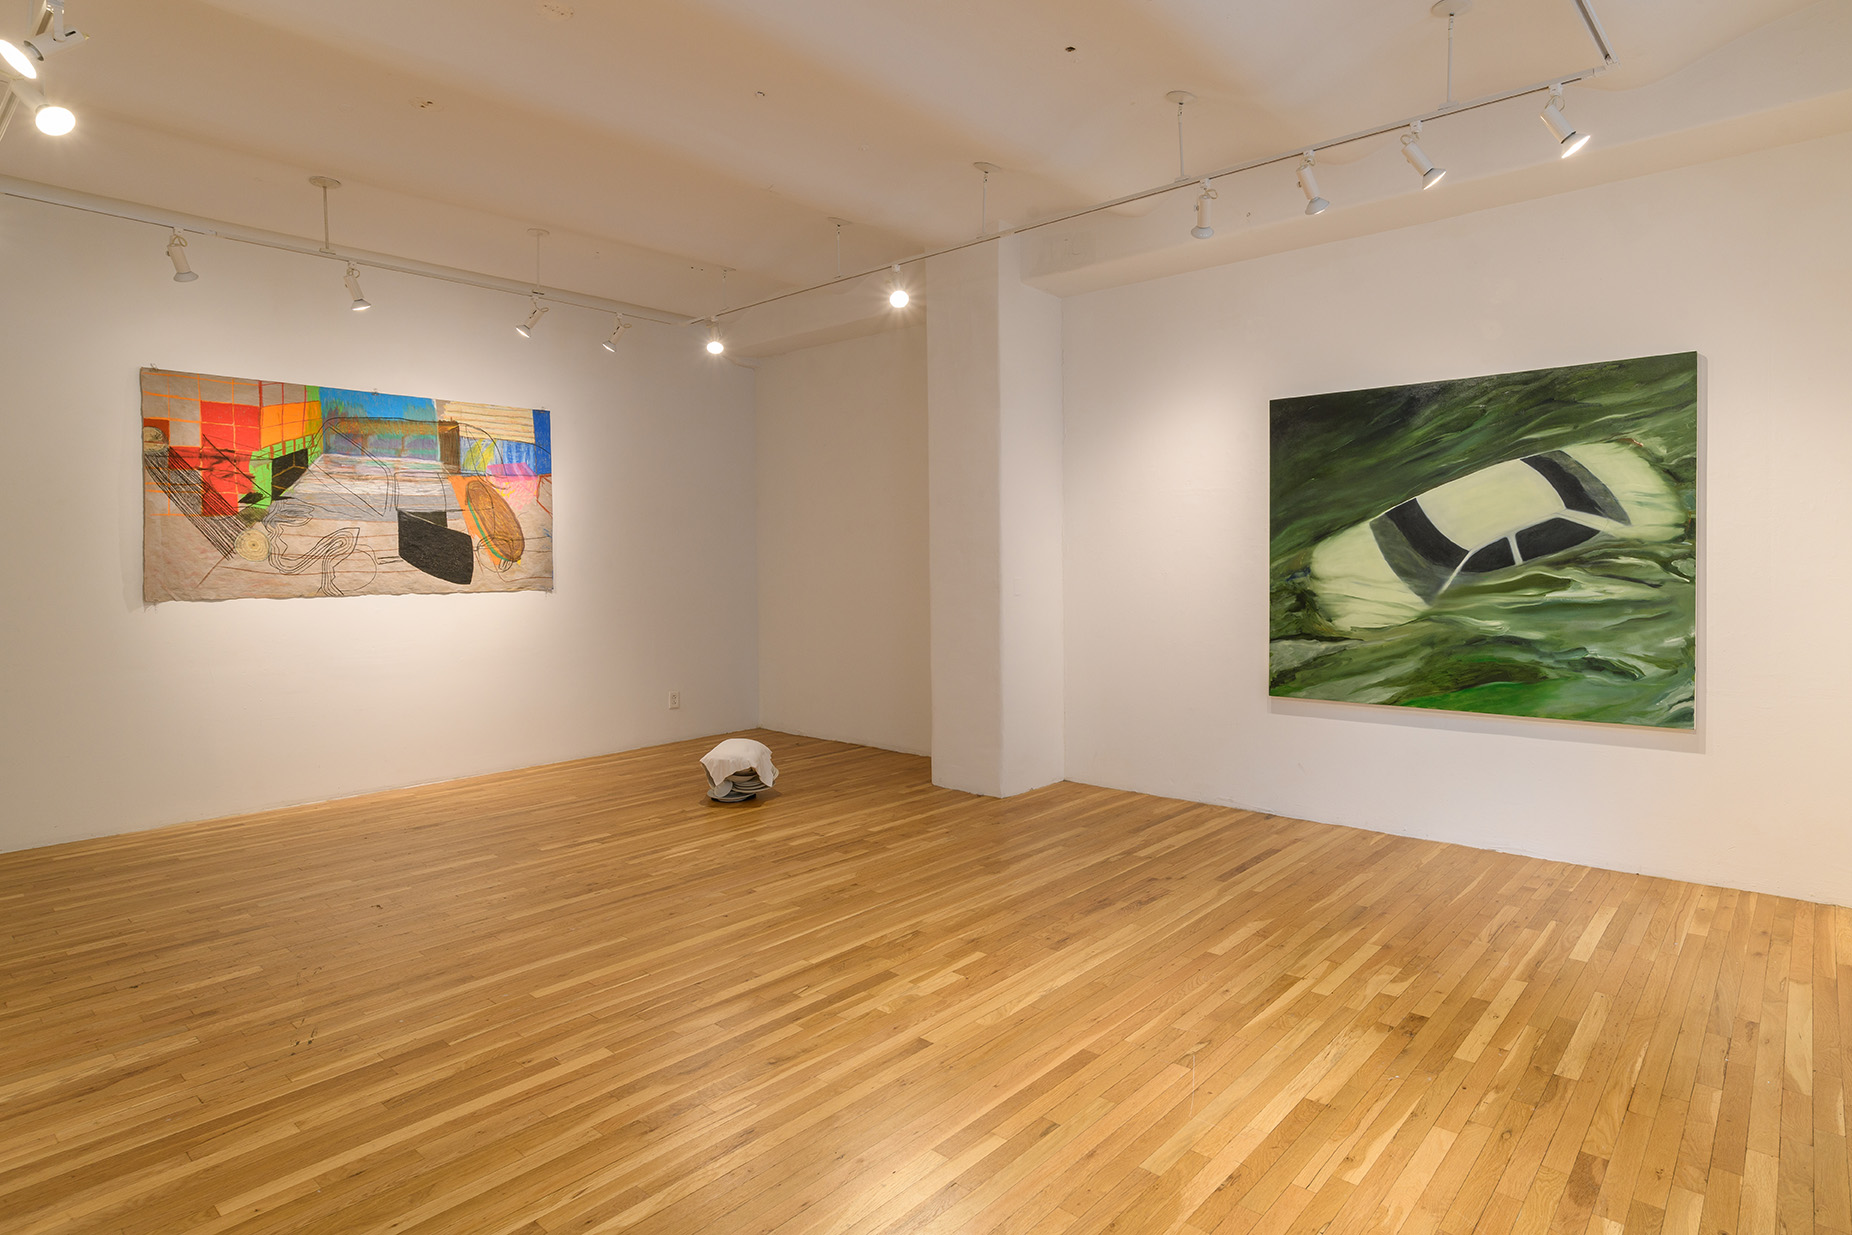 [Two large paintings of cars are hung on adjacent walls. In the corner between them is a white stack of dishes with a cloth draped over them.]